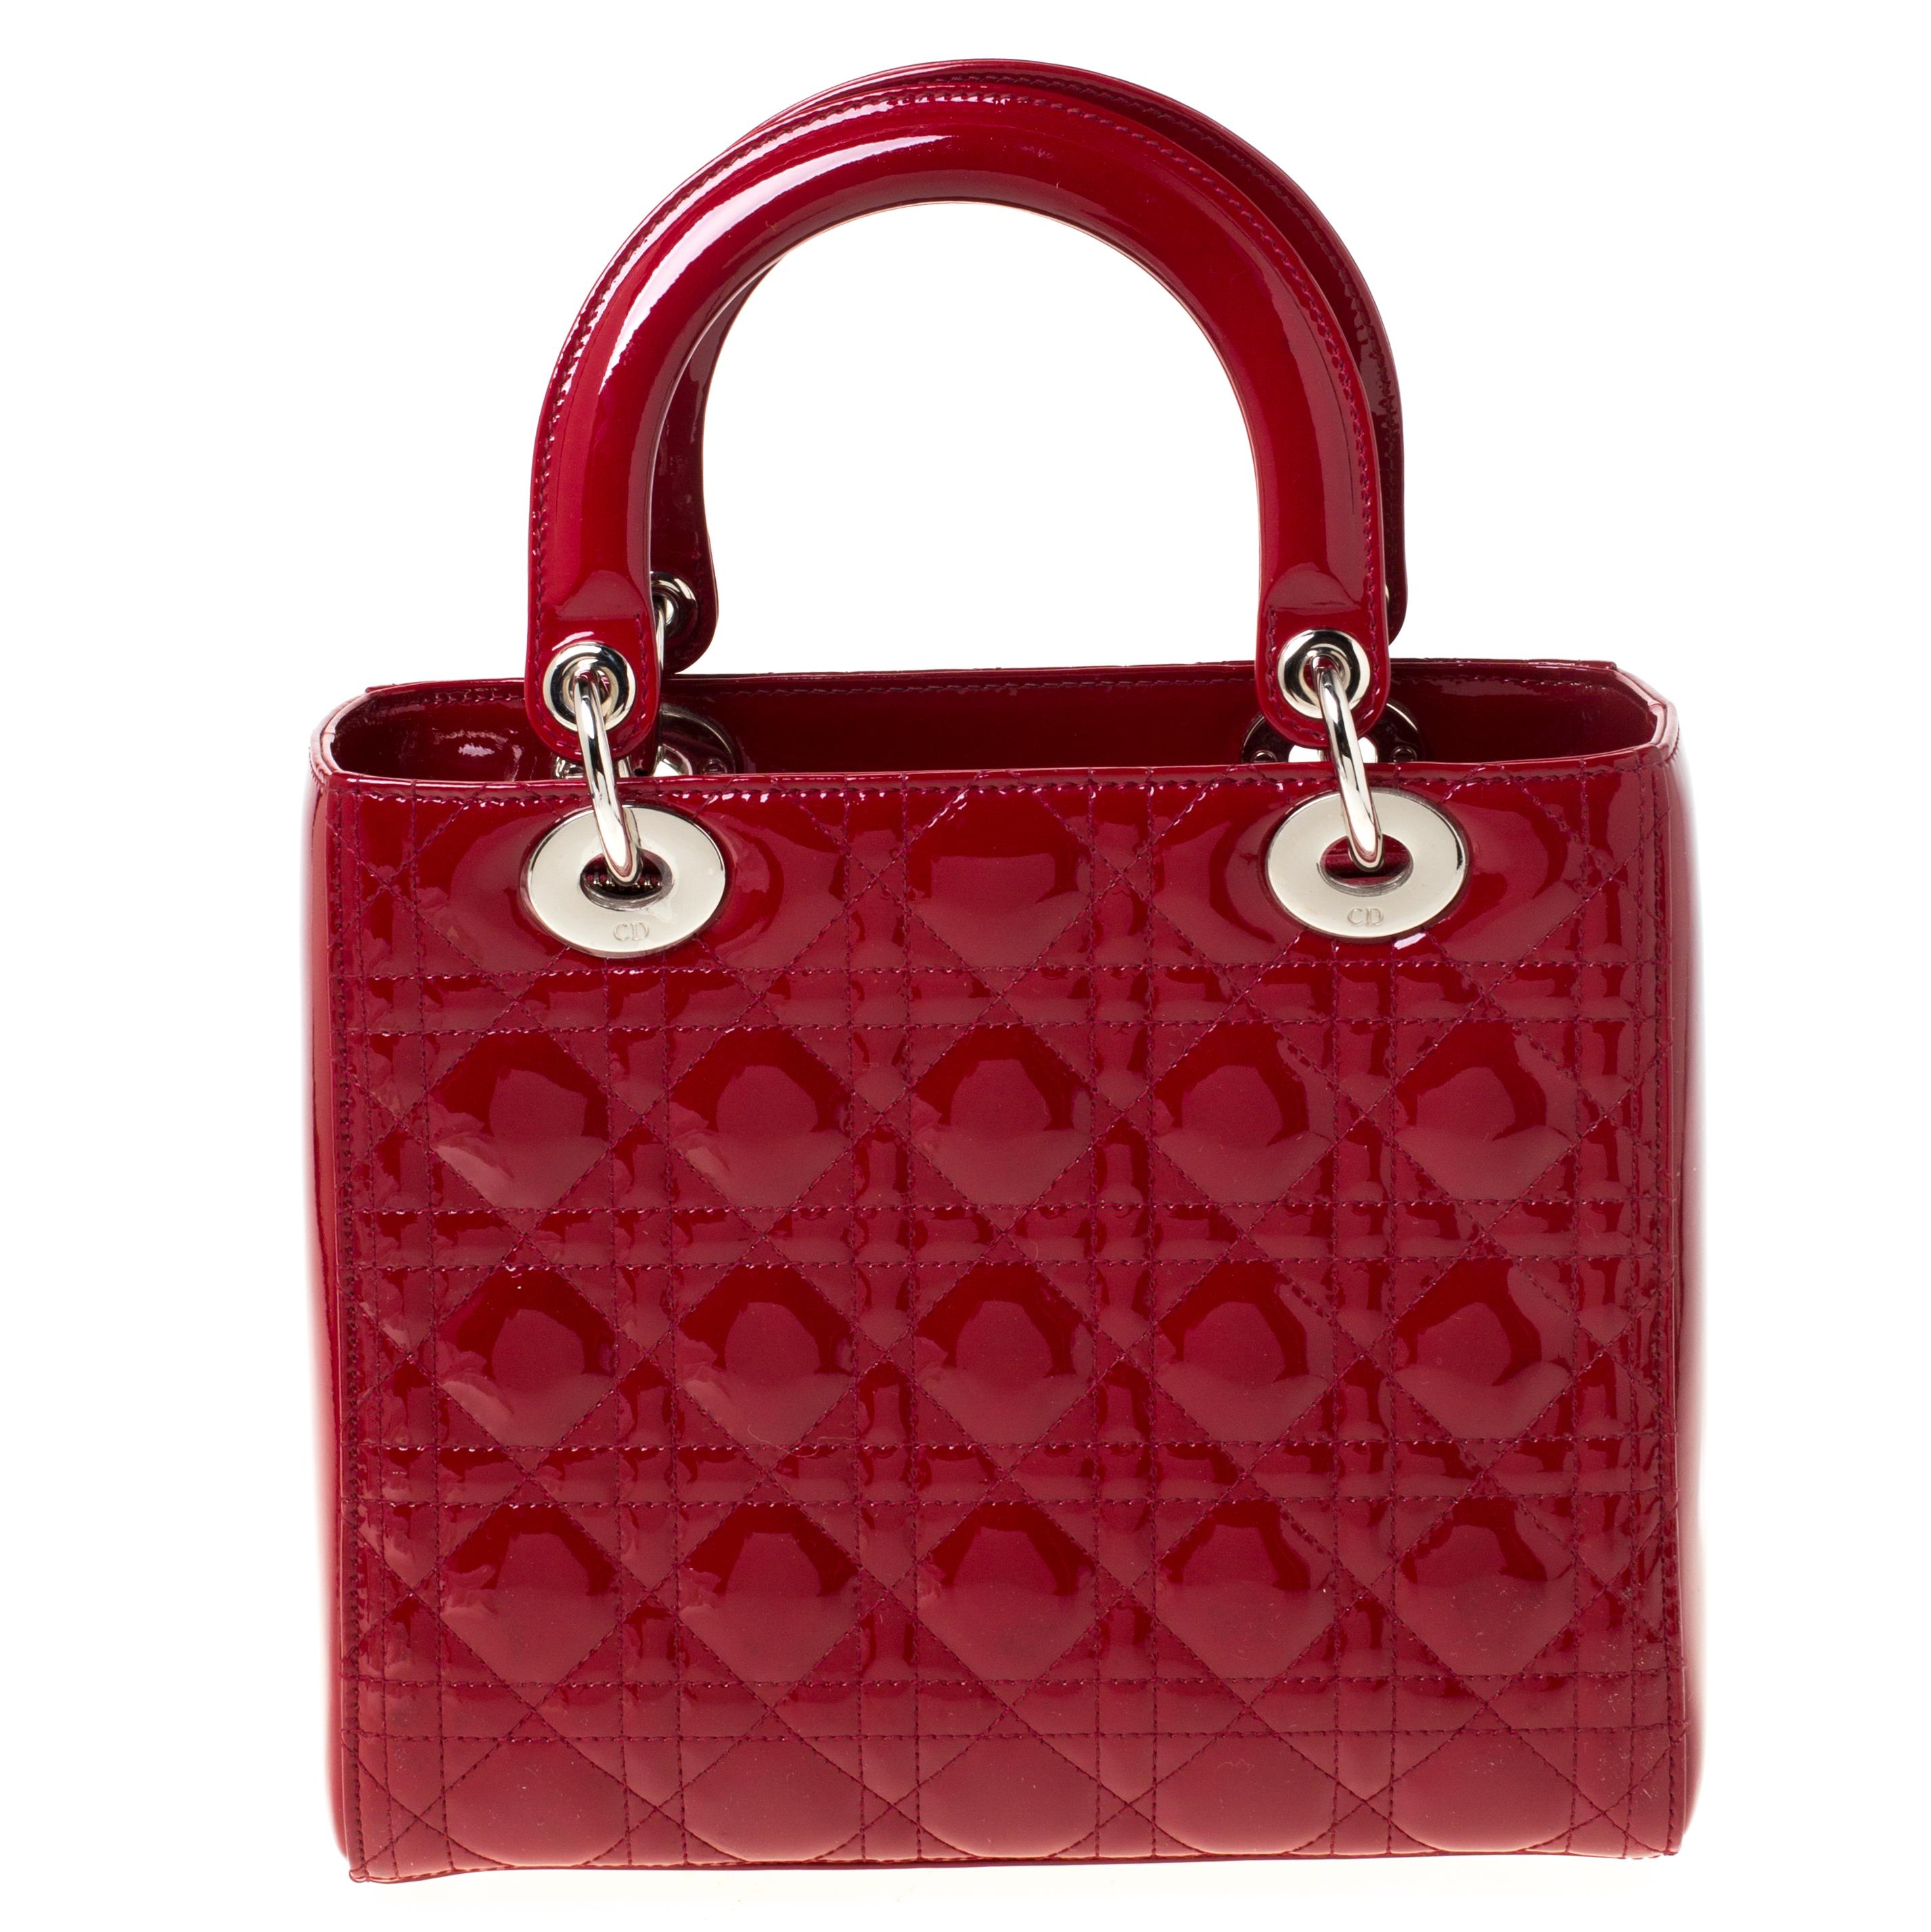 The Lady Dior tote from Dior is remarkable and highly coveted since its birth, and this one is a medium version of this iconic bag. This bag is a complete joy to witness! It comes meticulously crafted from red patent leather and designed in their